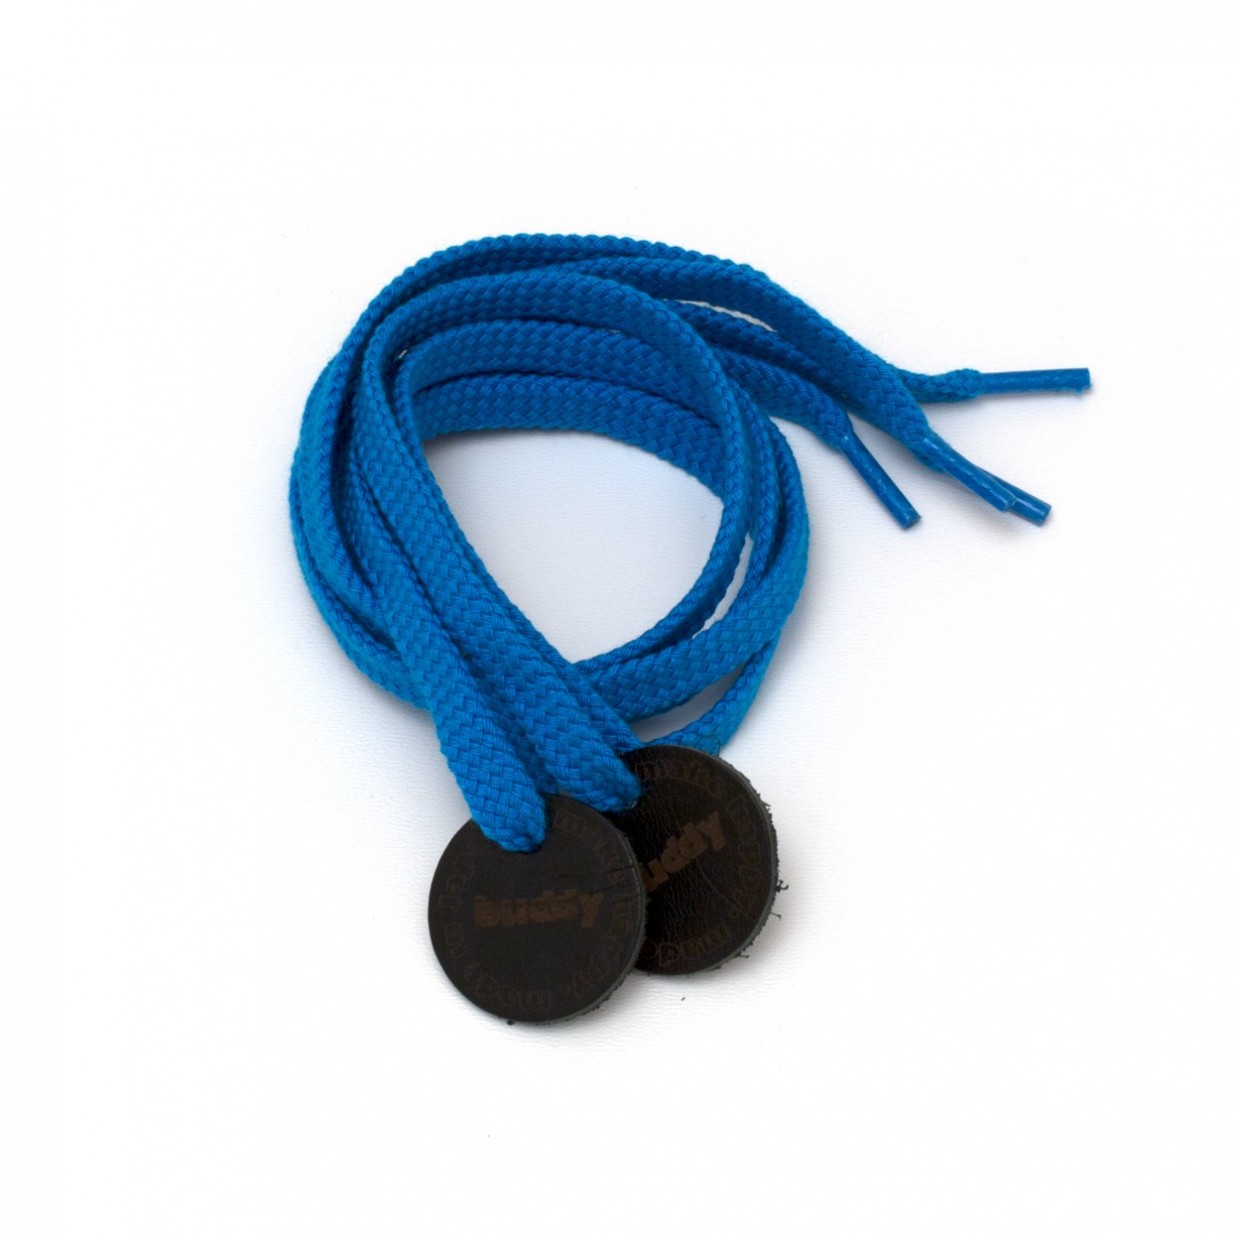 Shoelaces Blue with Leather patch 78 cm : 31 "